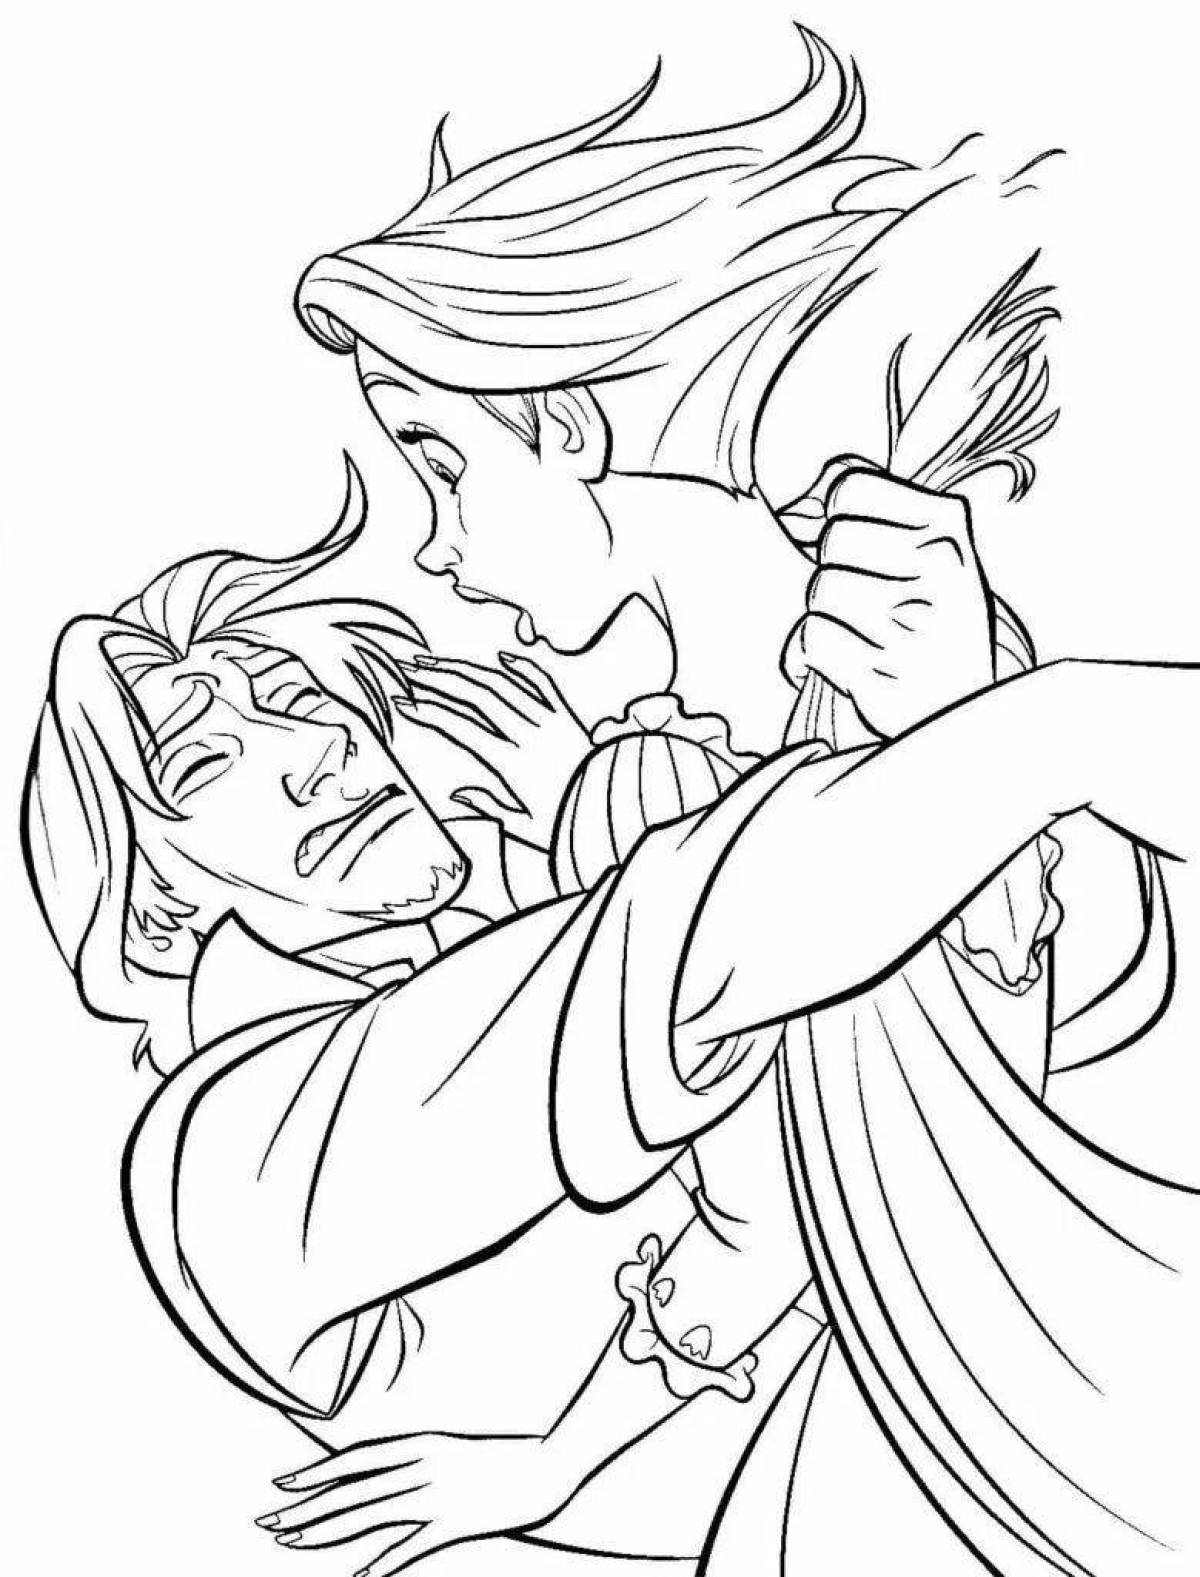 Exquisite rapunzel and eugene coloring book